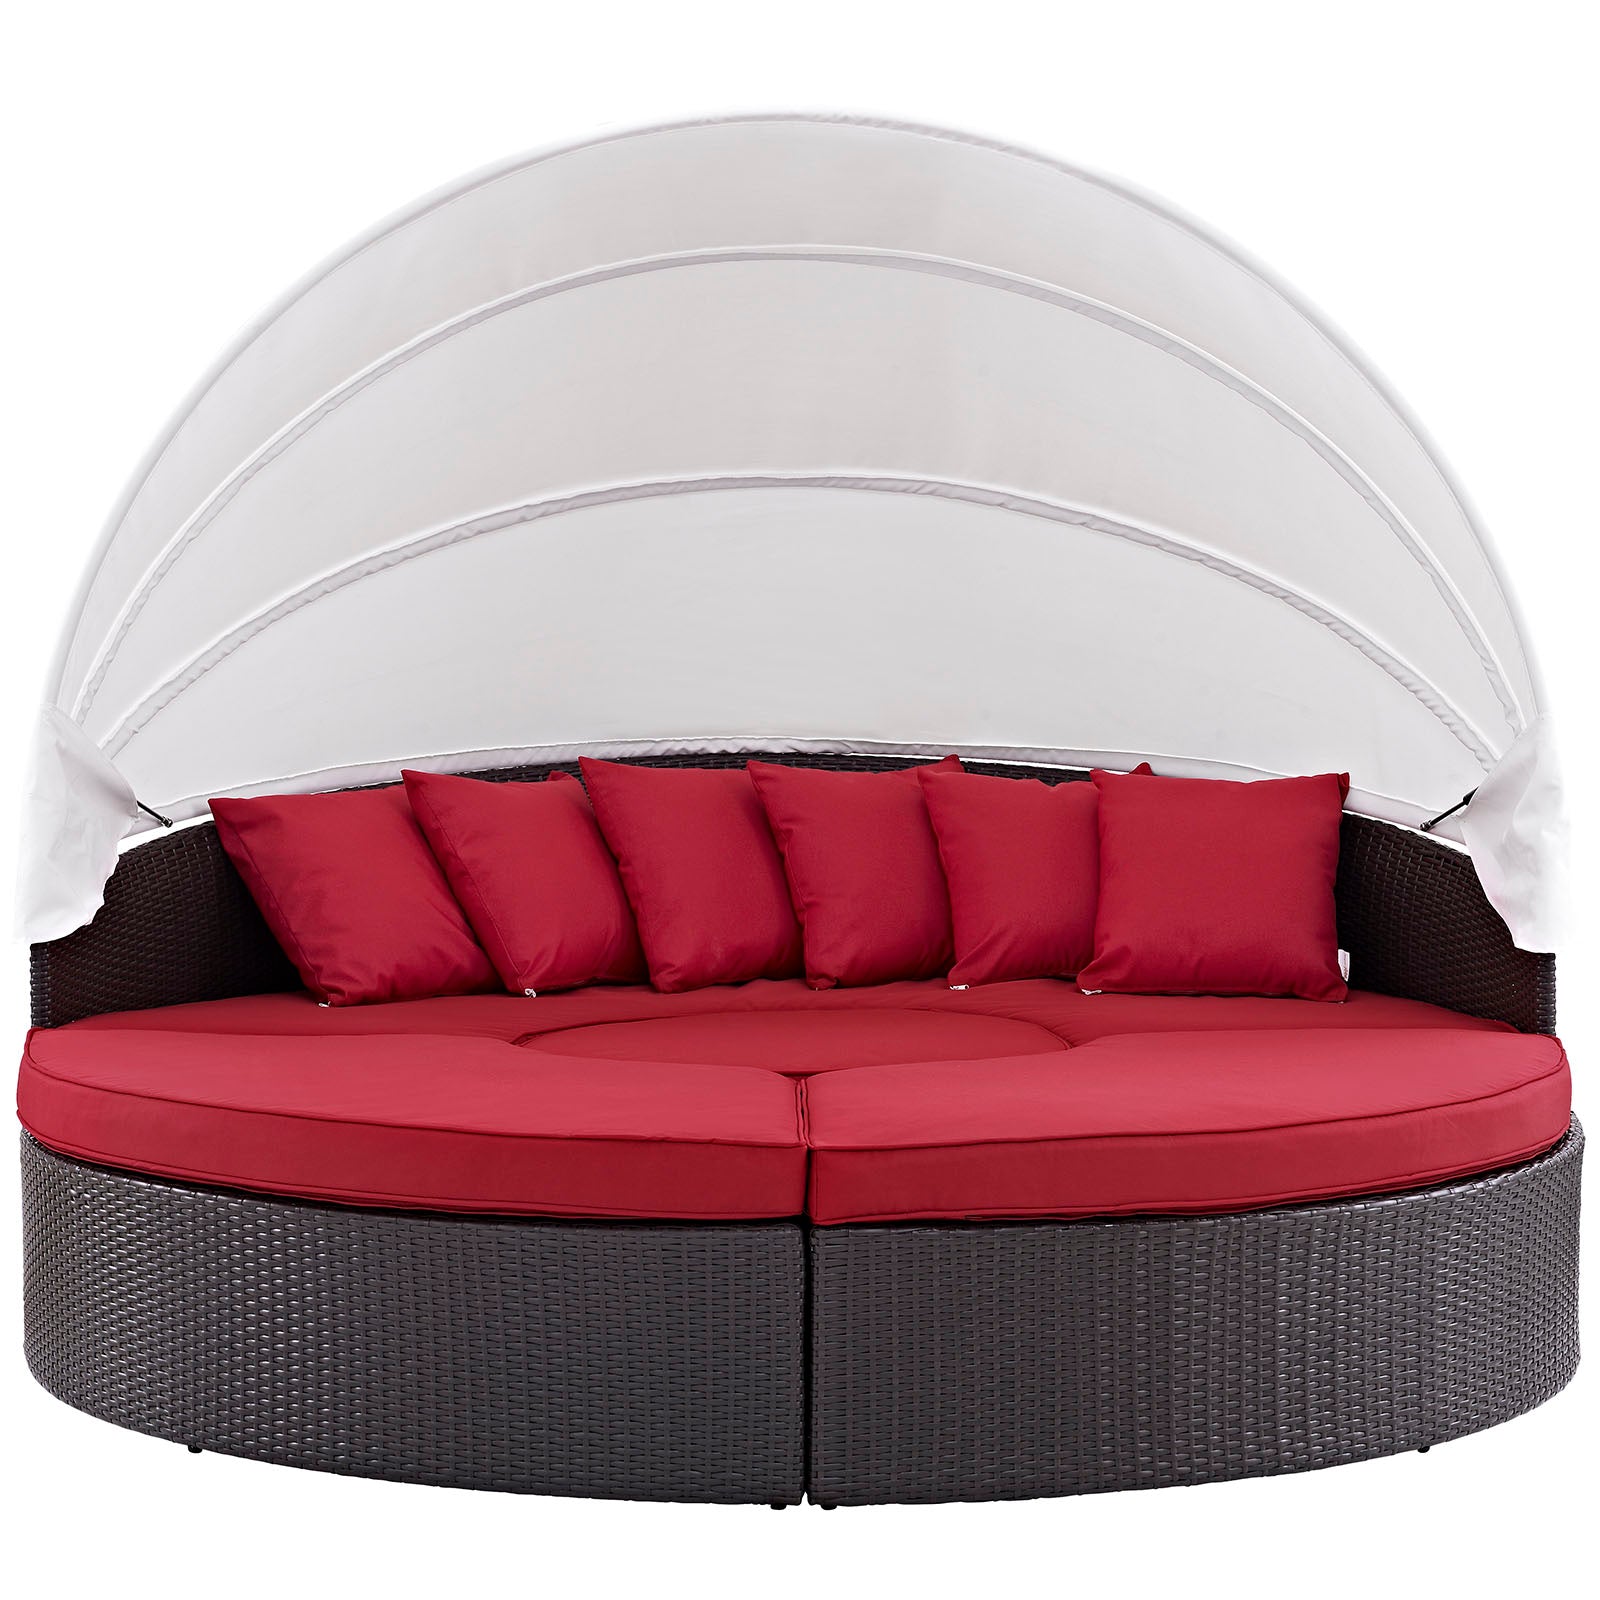 Modway Patio Daybeds - Convene Canopy Outdoor Patio 86.5"W Daybed Espresso Red